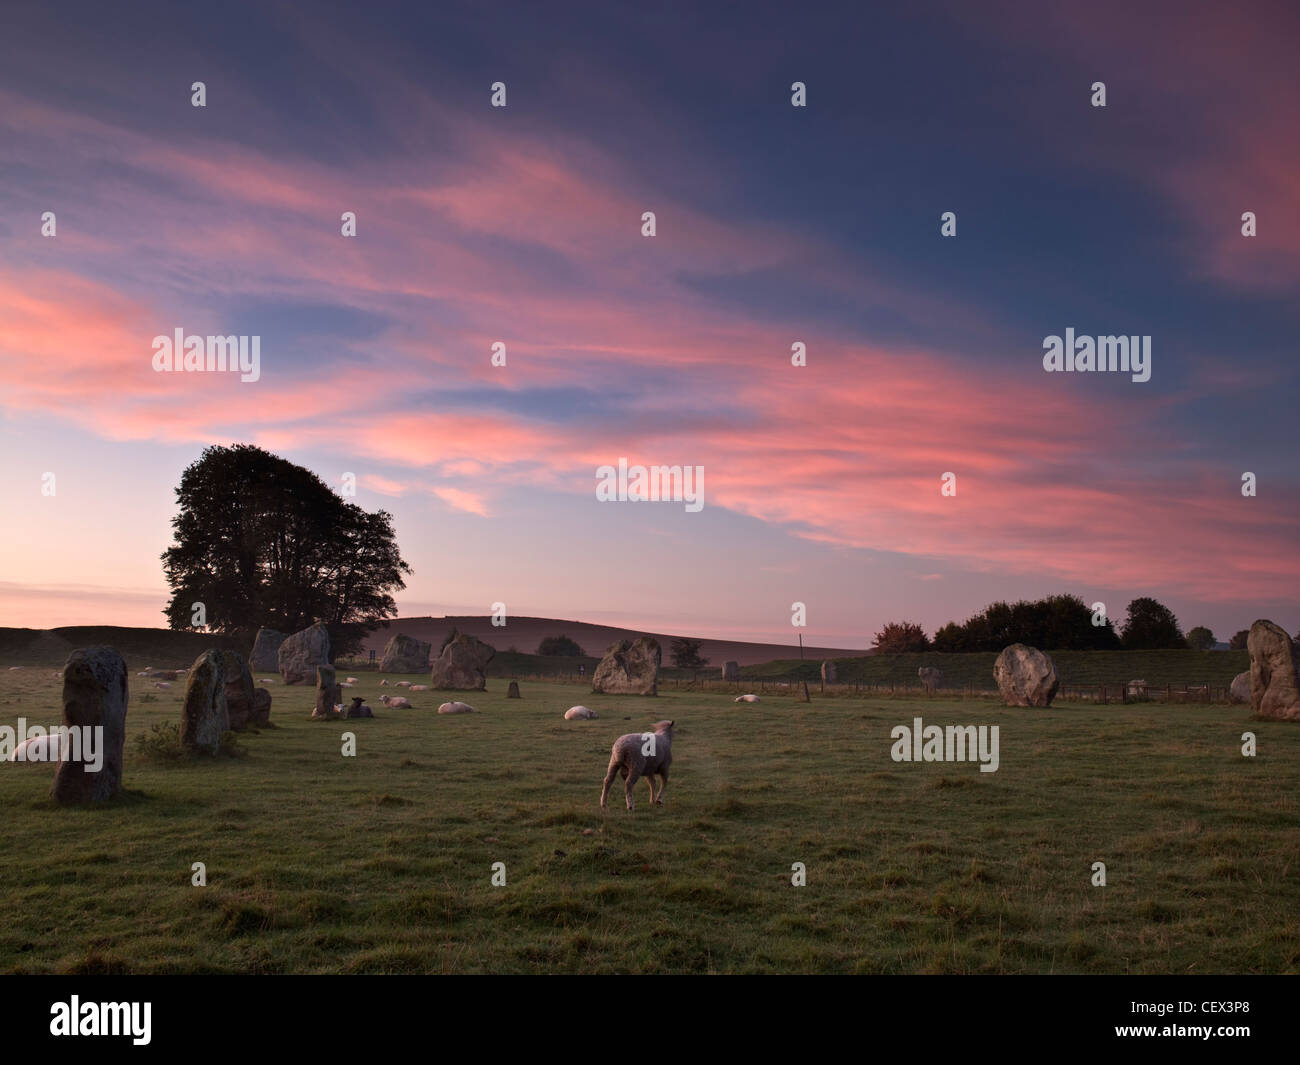 Sheep grazing by Avebury stone circle, one of Europe's largest prehistoric stone circles, at dawn. Stock Photo